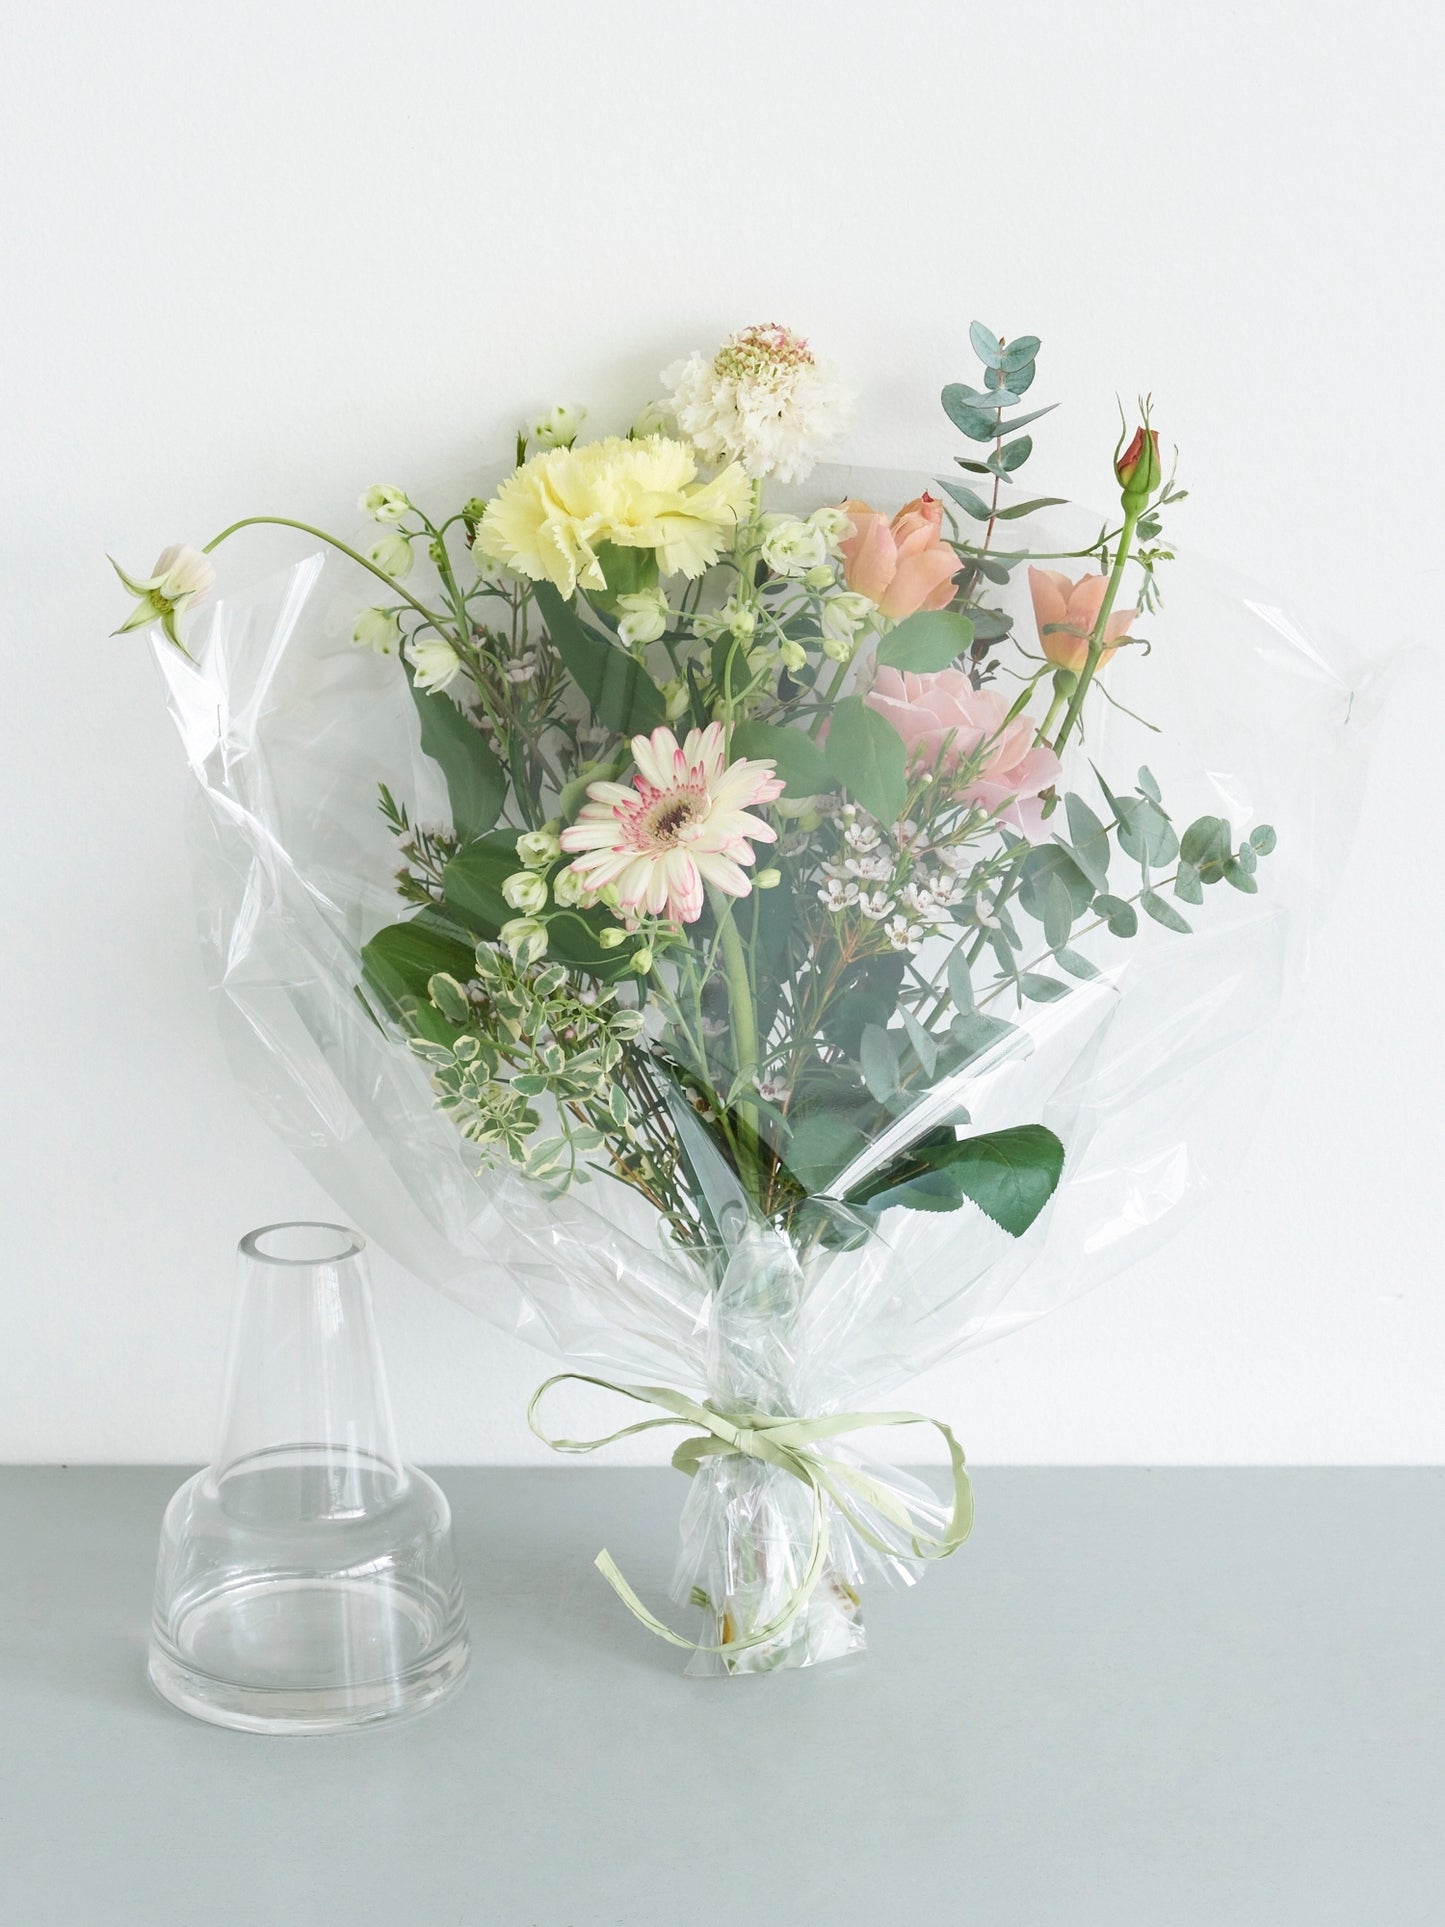 【mother's day]】Set of bouquet S and clear vase 【Delivery date: 5/10 (Fri)】